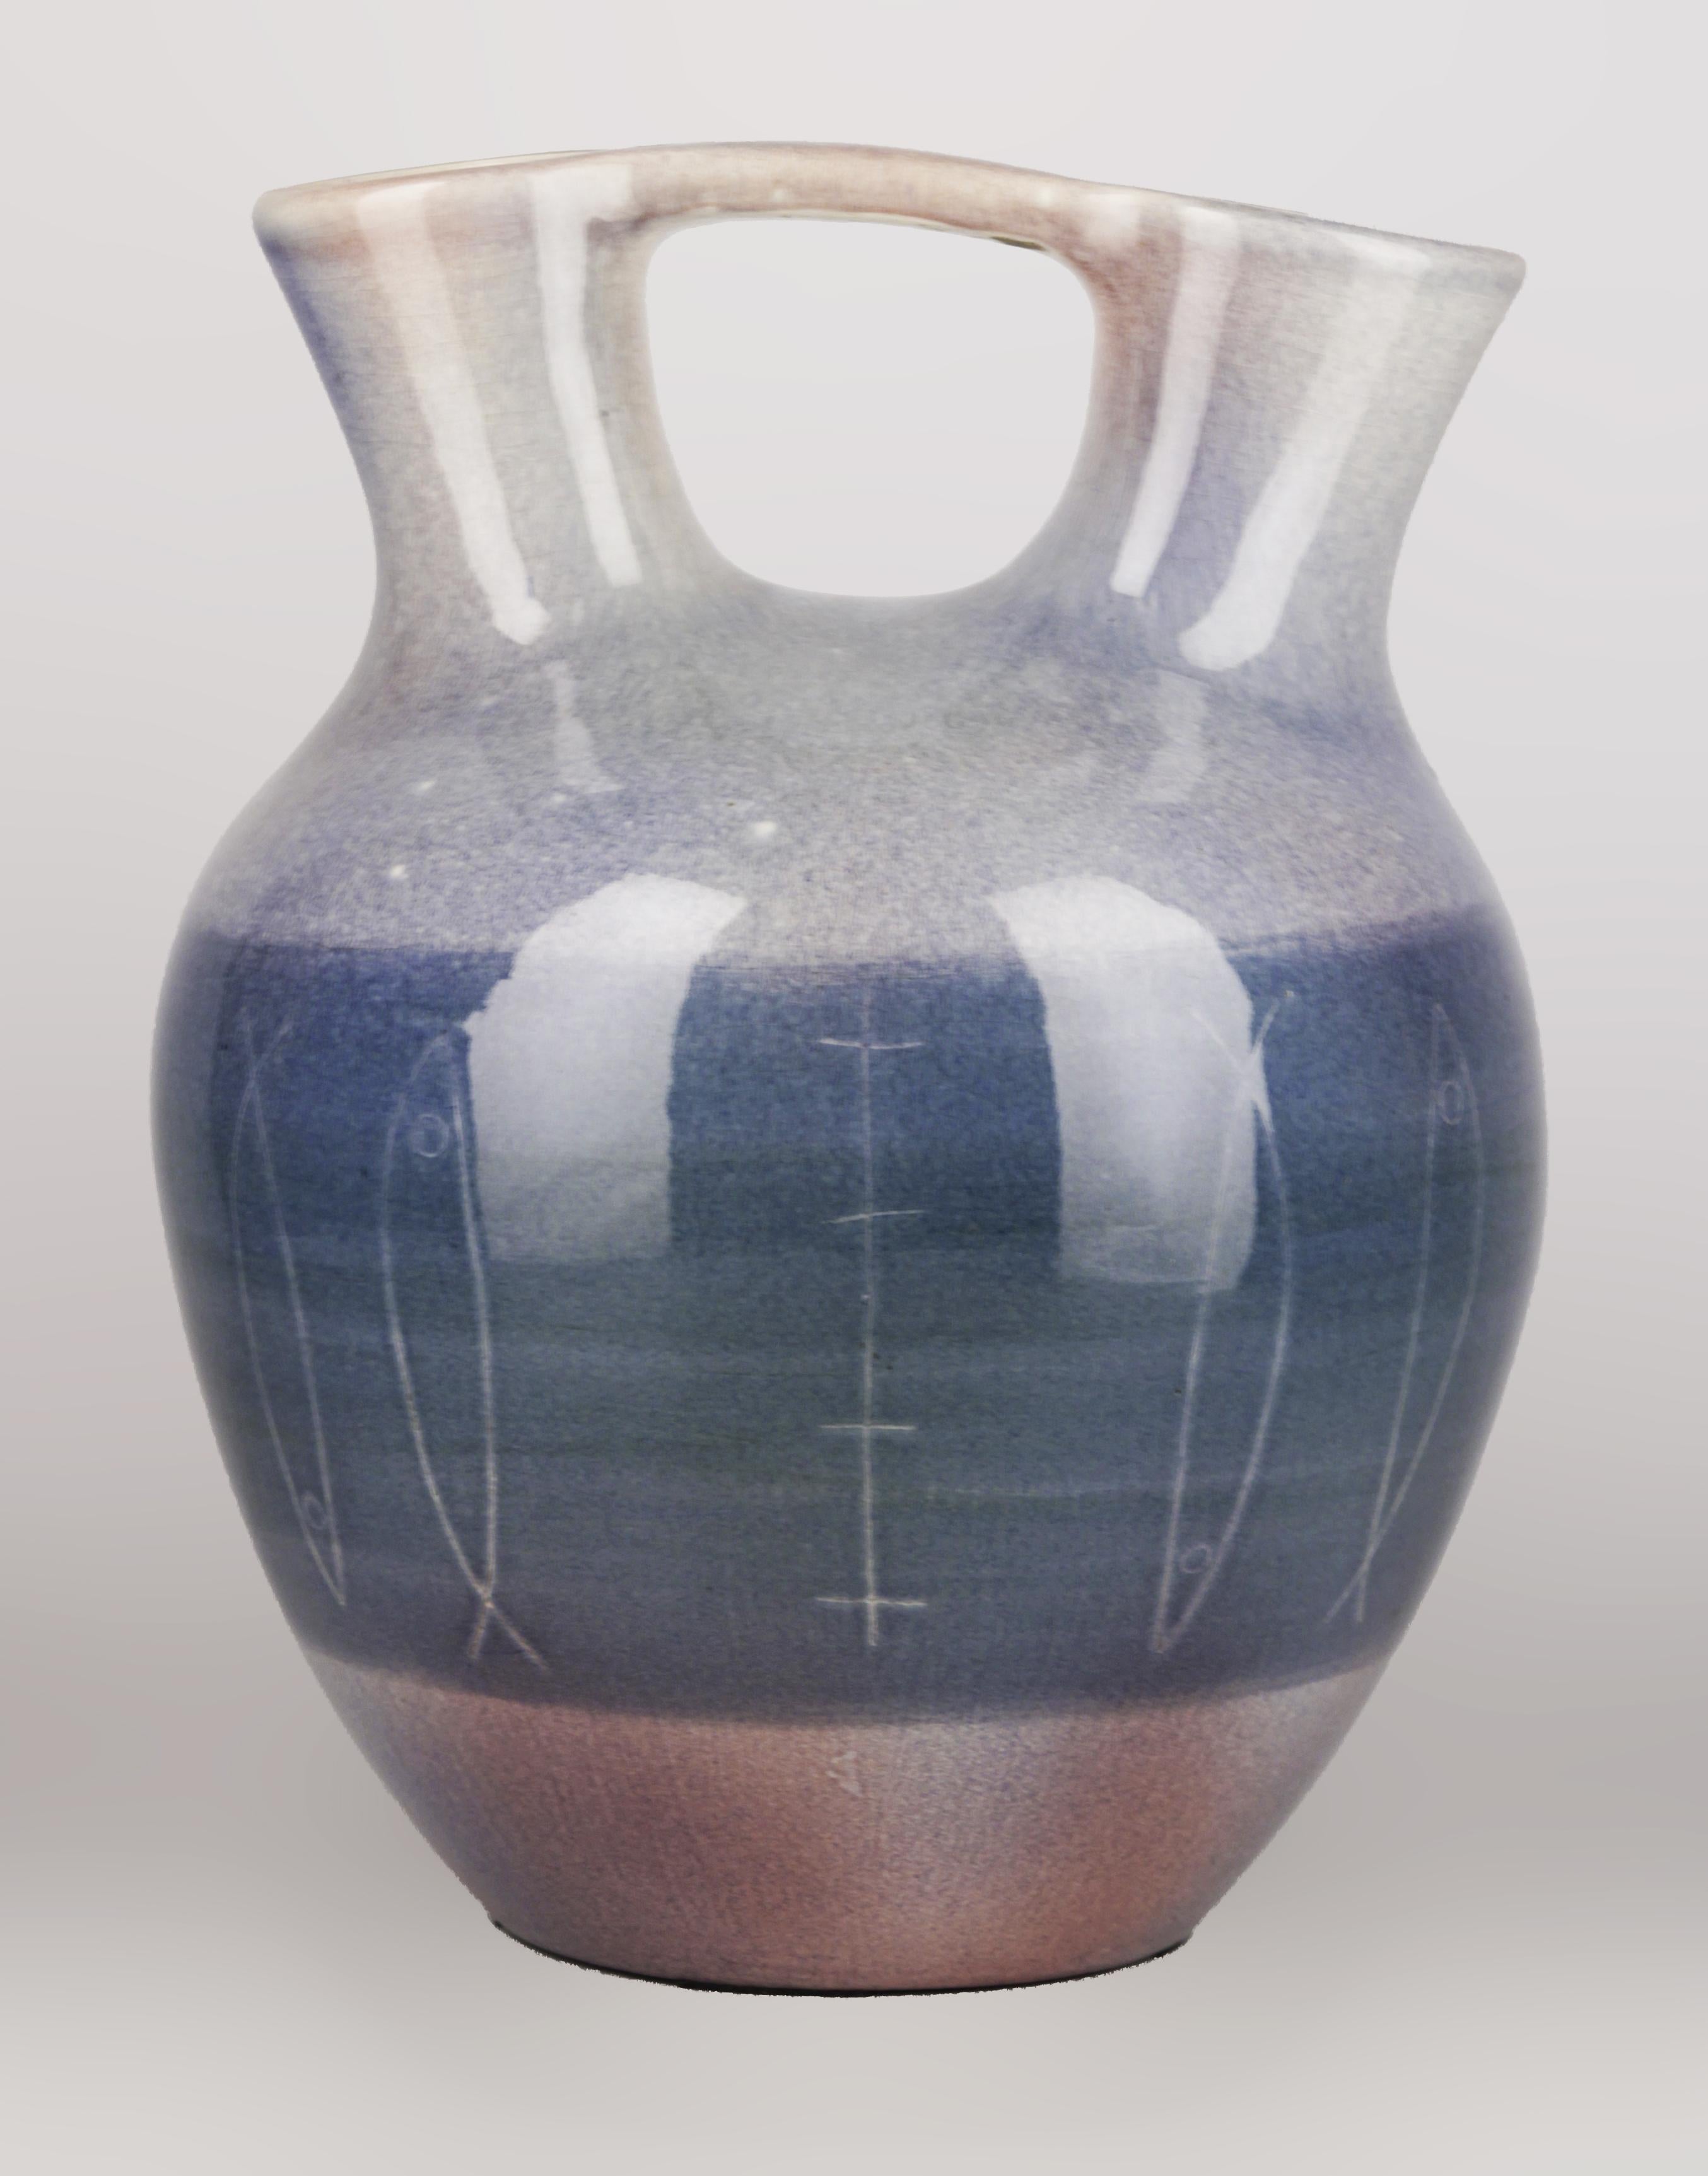 Art Déco italian glazed ceramic vase/amphora with handle and double spout

By: unknown
Material: paint, ceramic
Technique: enameled, glazed, hand-crafted, molded, painted, pressed
Dimensions: 11 in x 14 in
Date: early 20th century
Style: Art